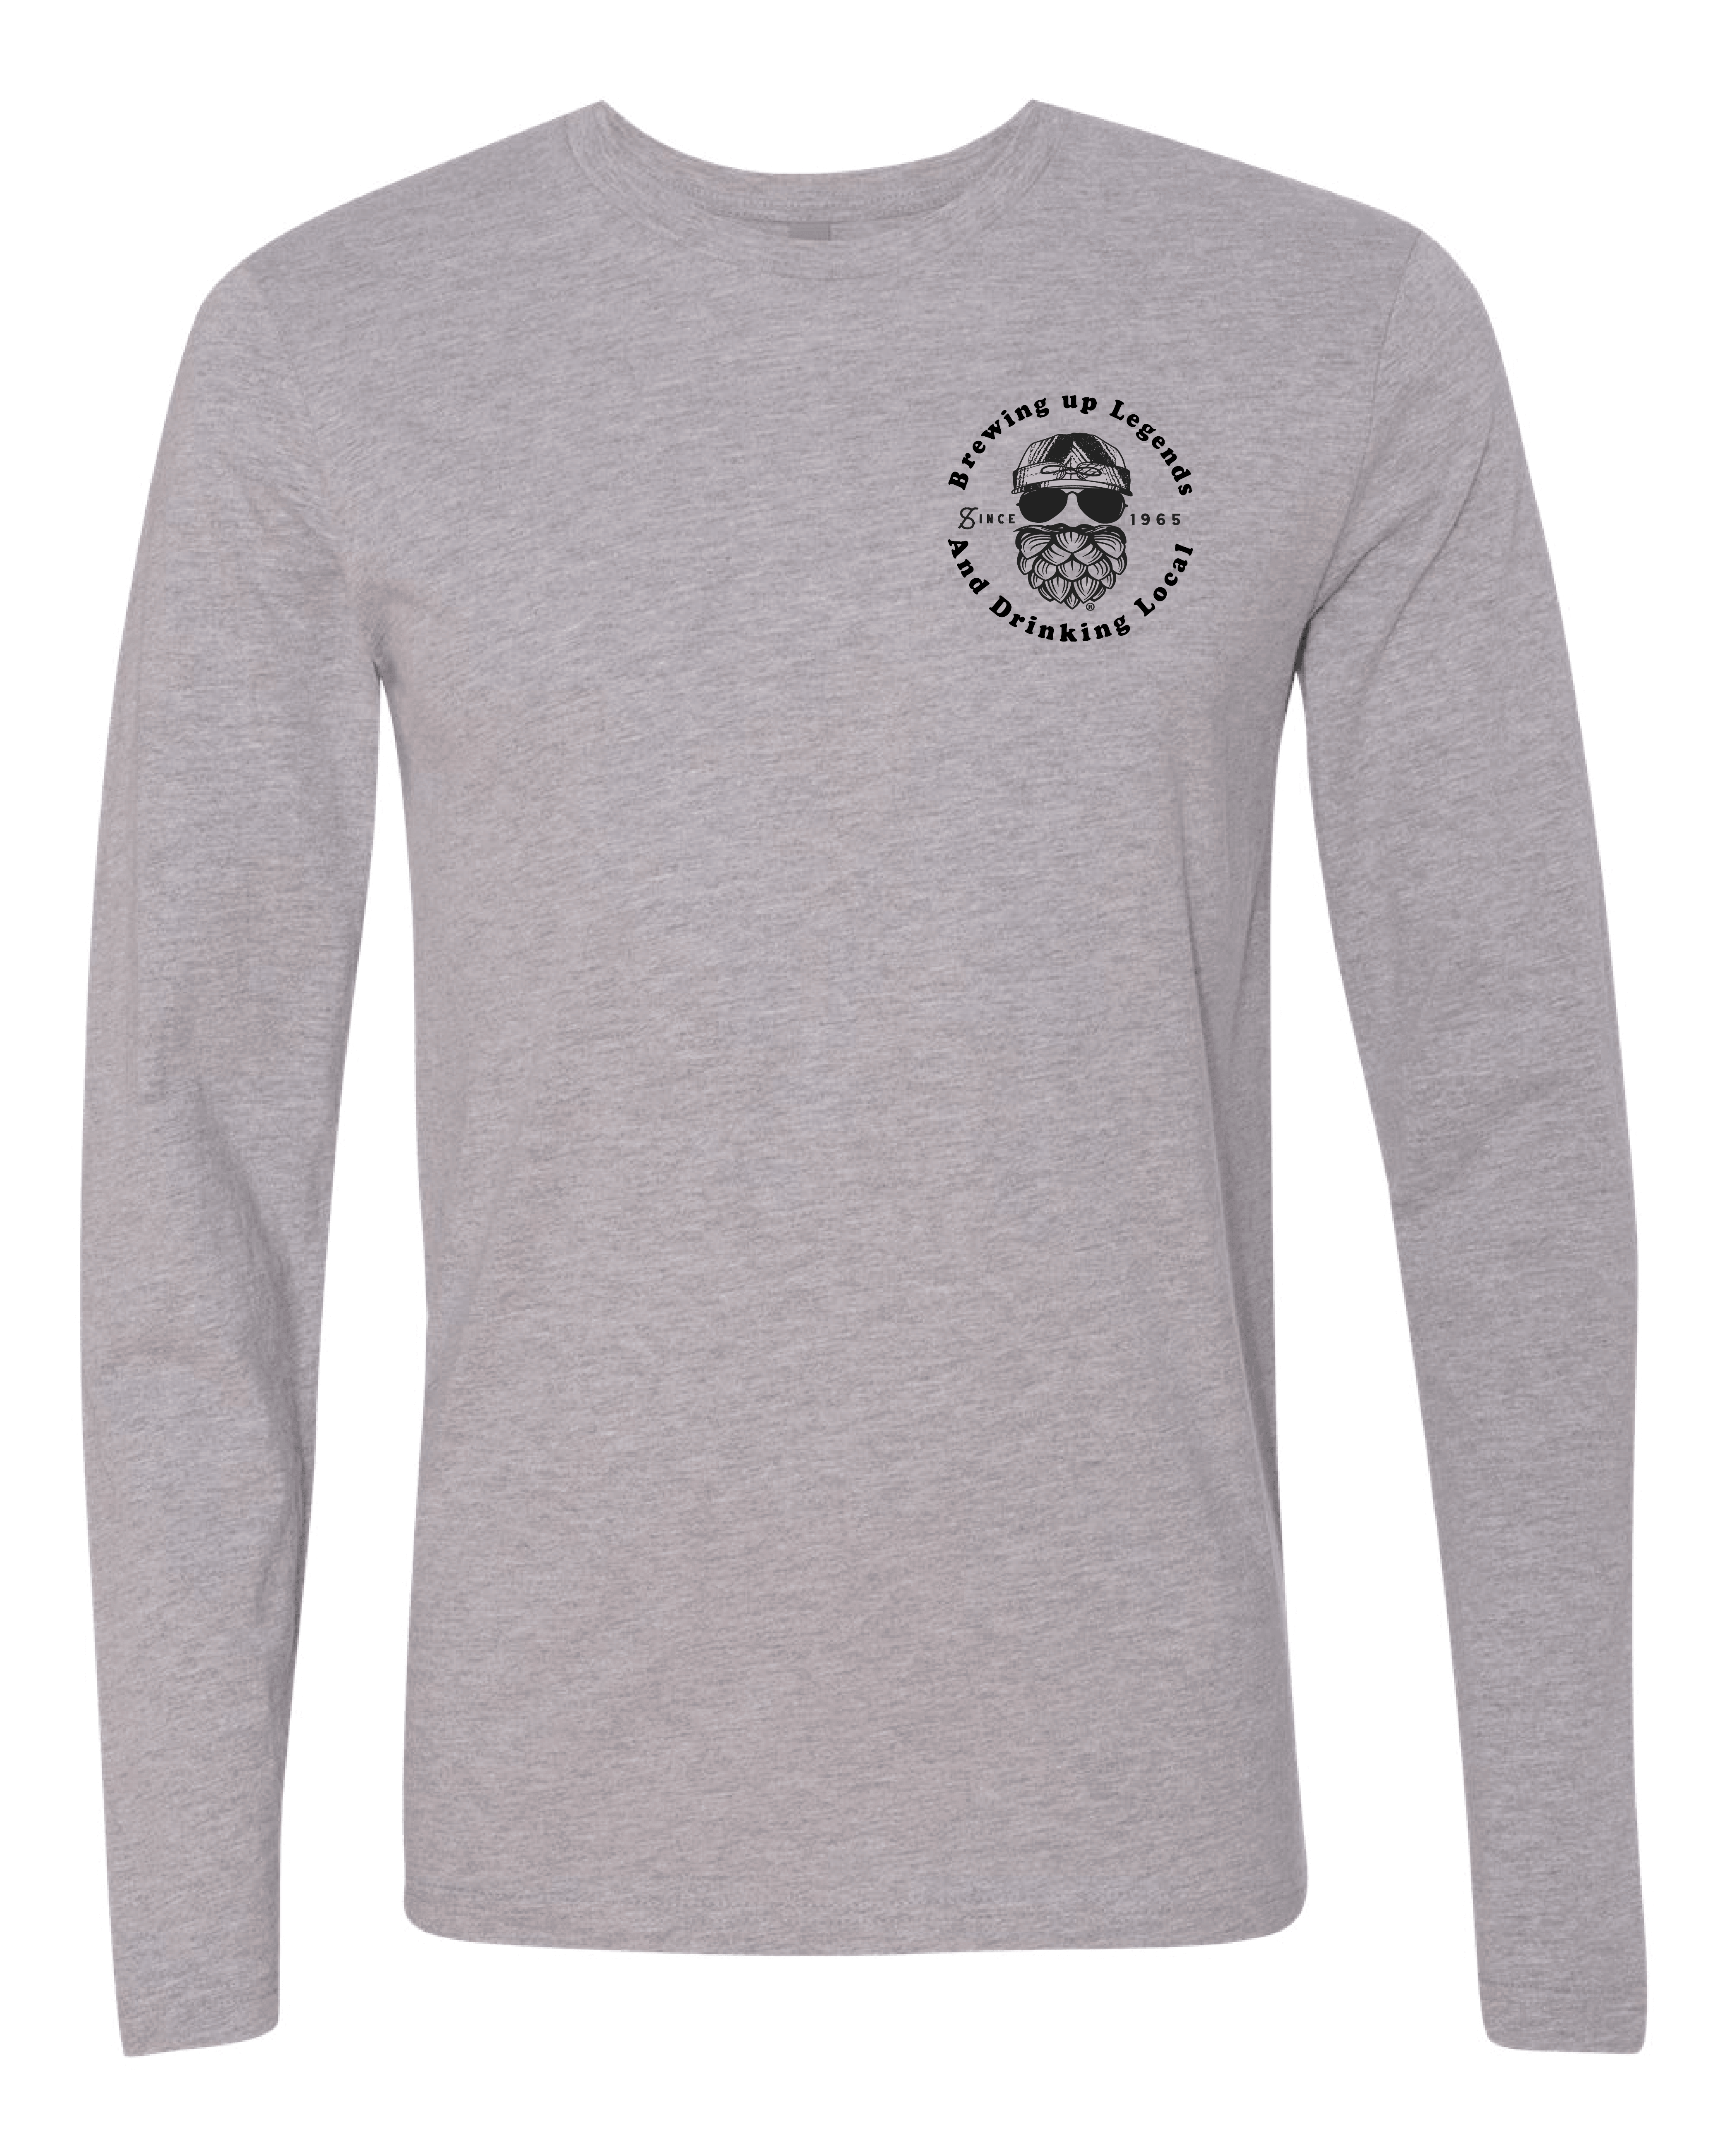 Local Legend Long Sleeve - Ales to Trails